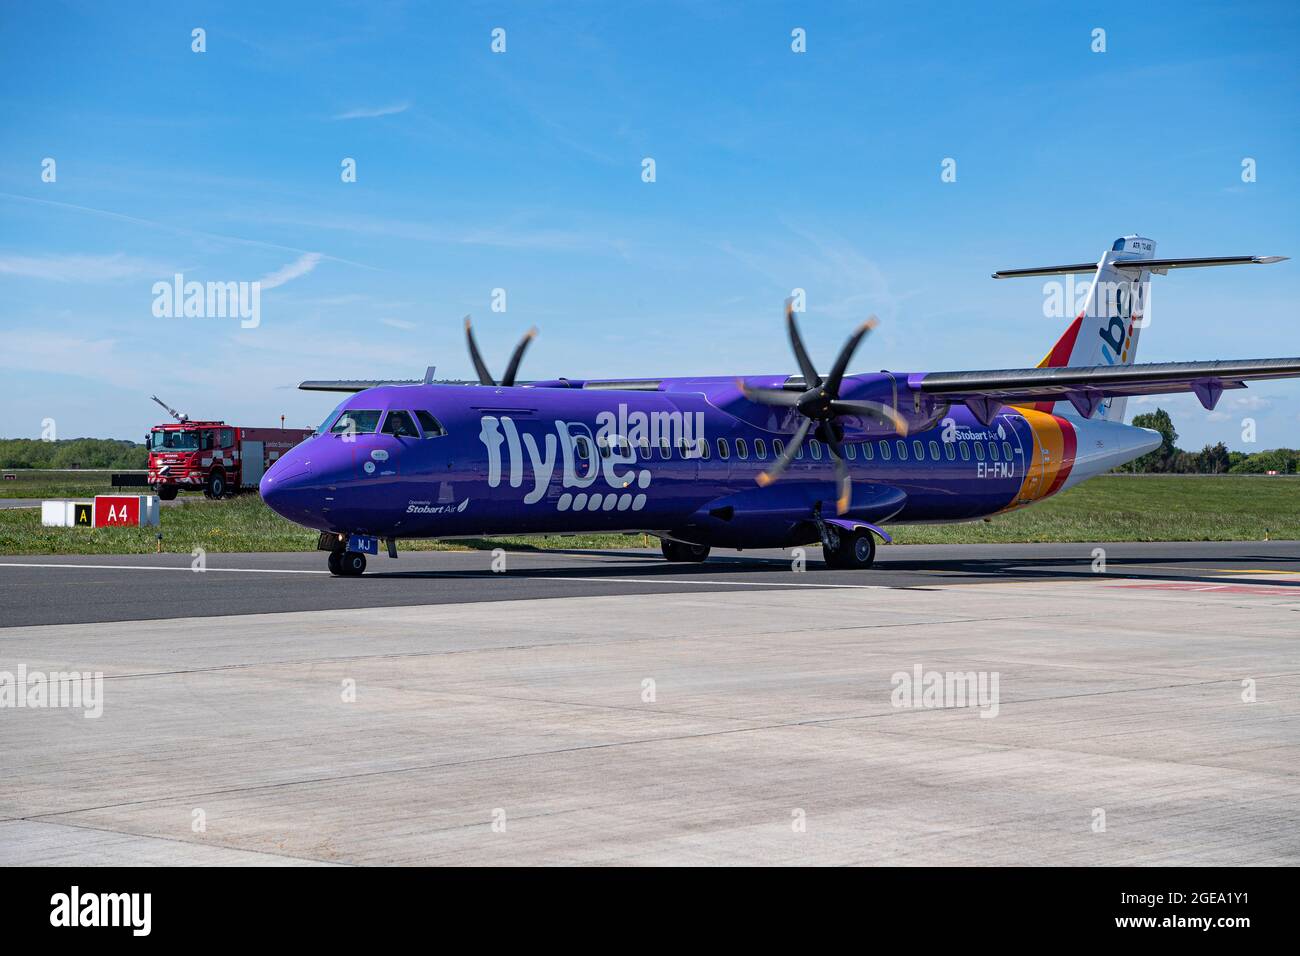 A Flybe aircraft taxis towards the runway for take off. Stock Photo